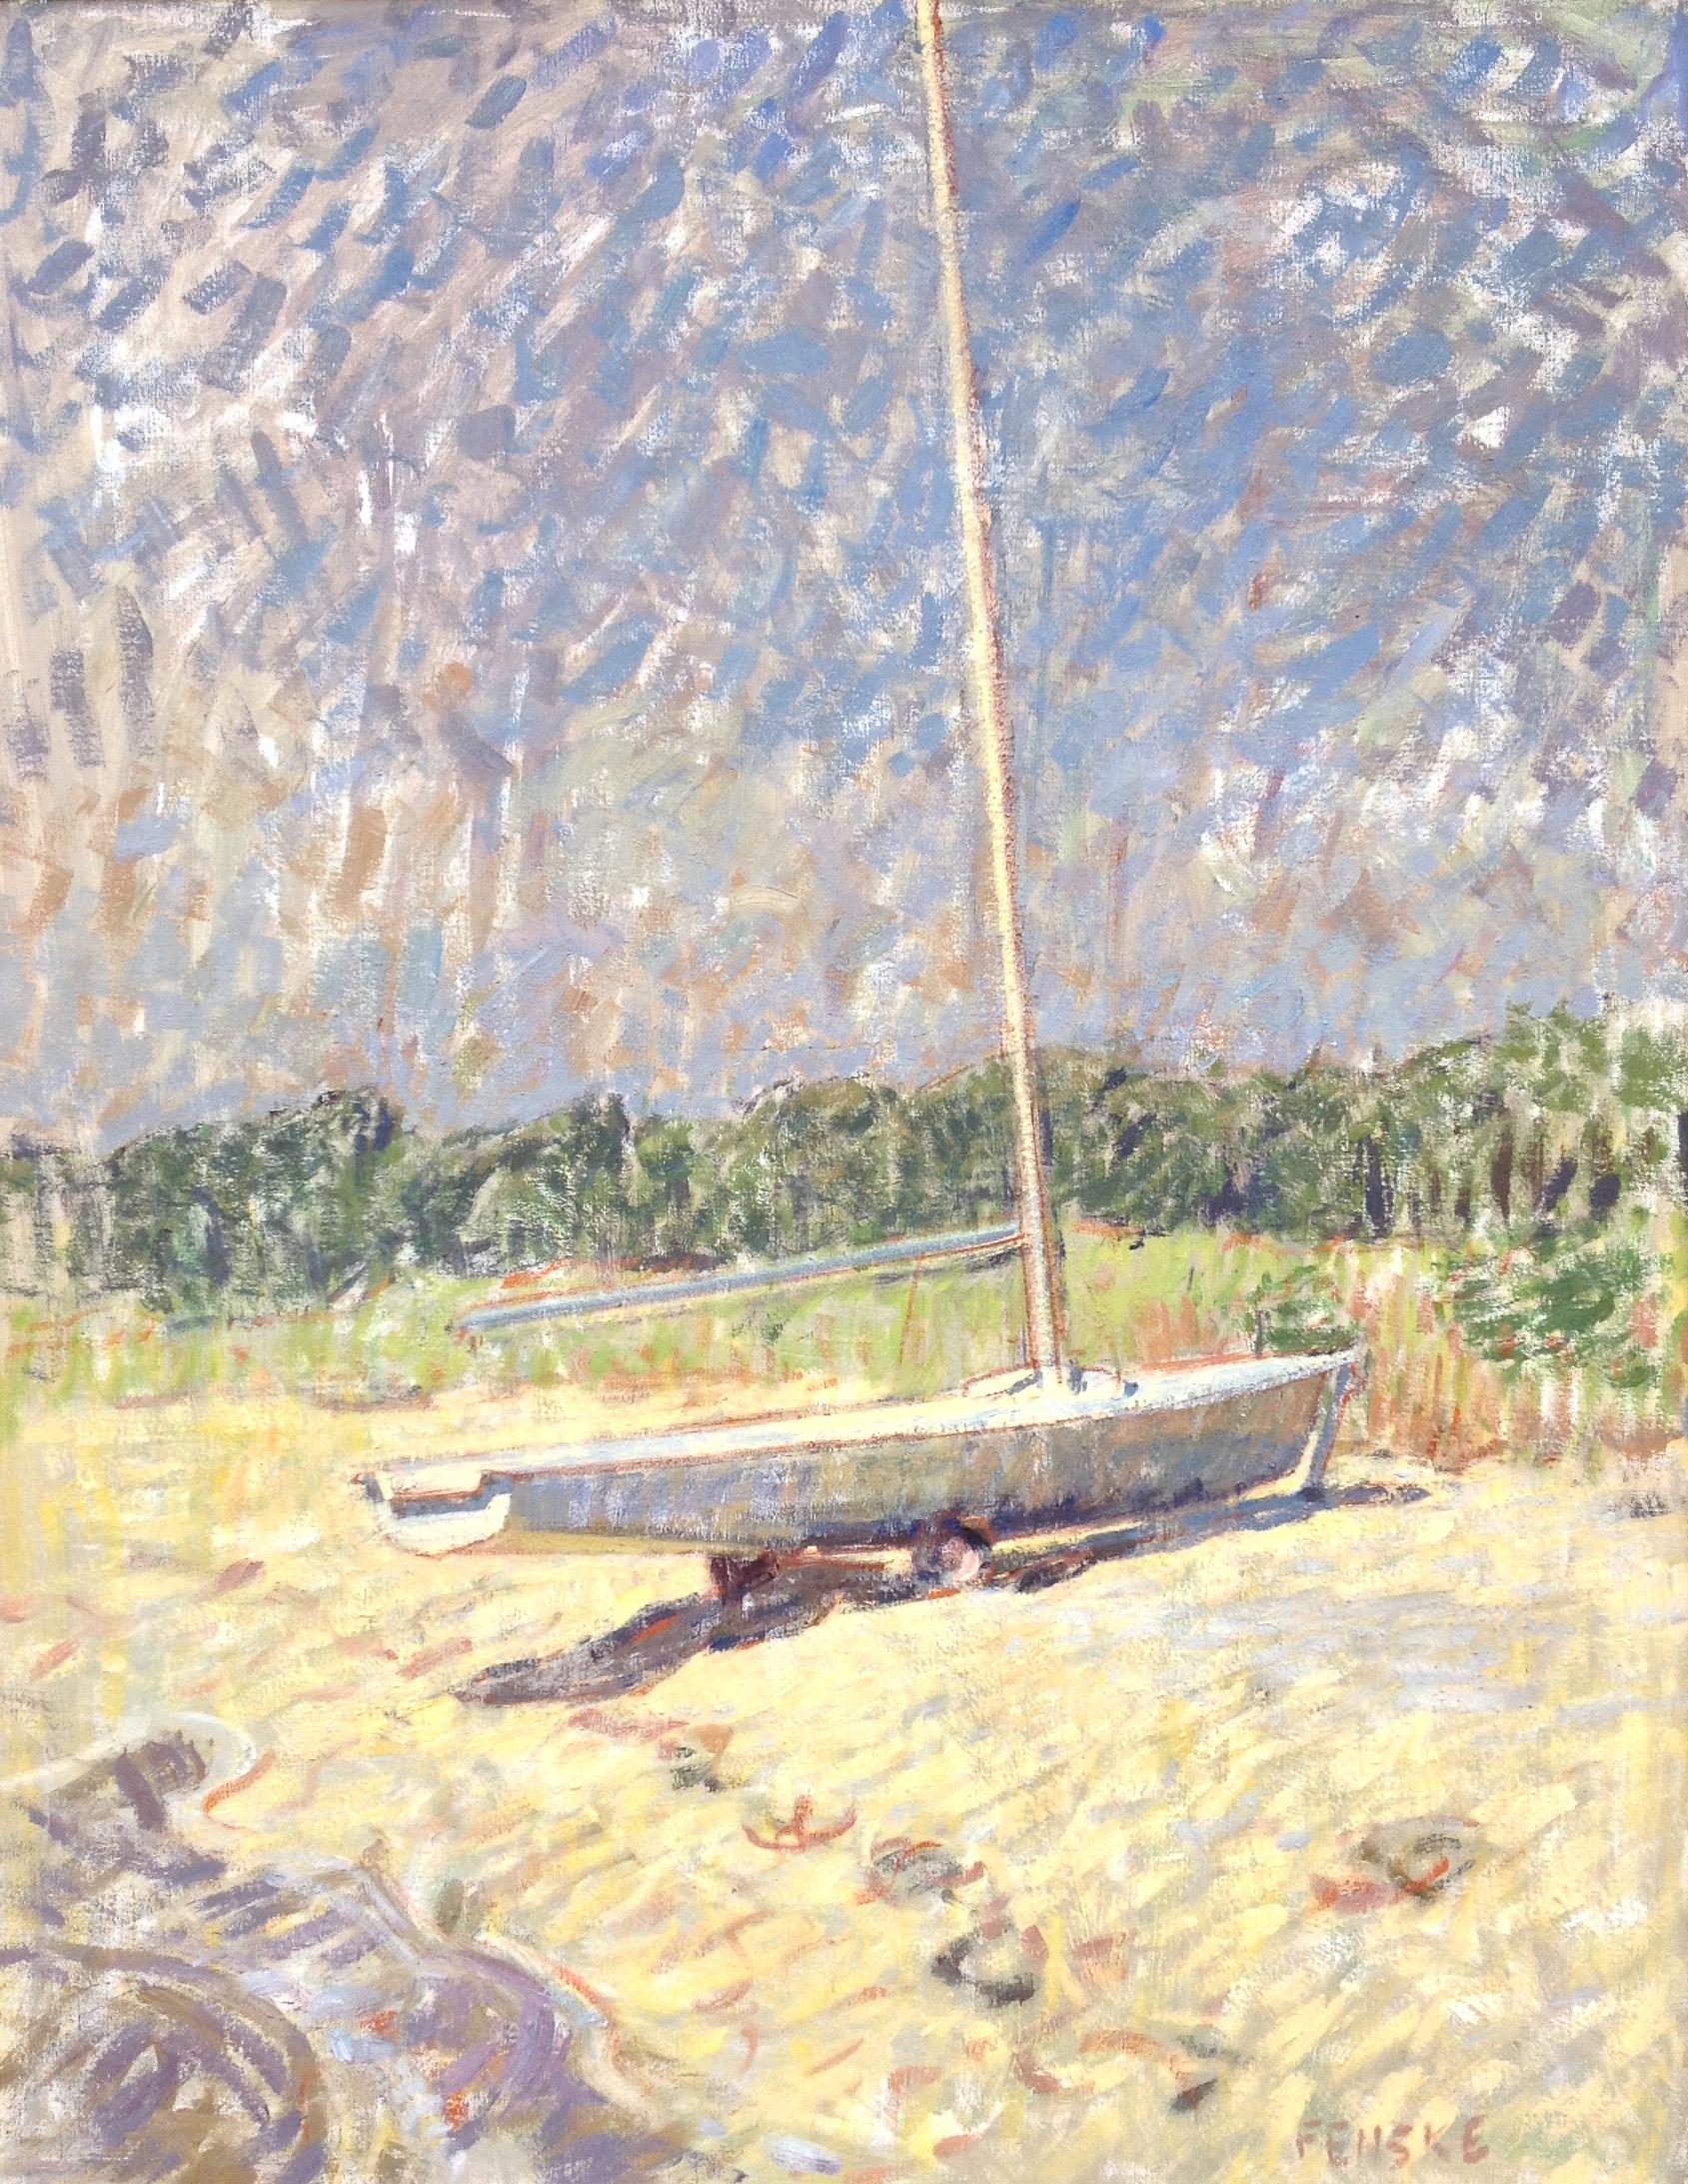 "Sailboat" contemporary impressionist oil painting of boat on the beach, summer